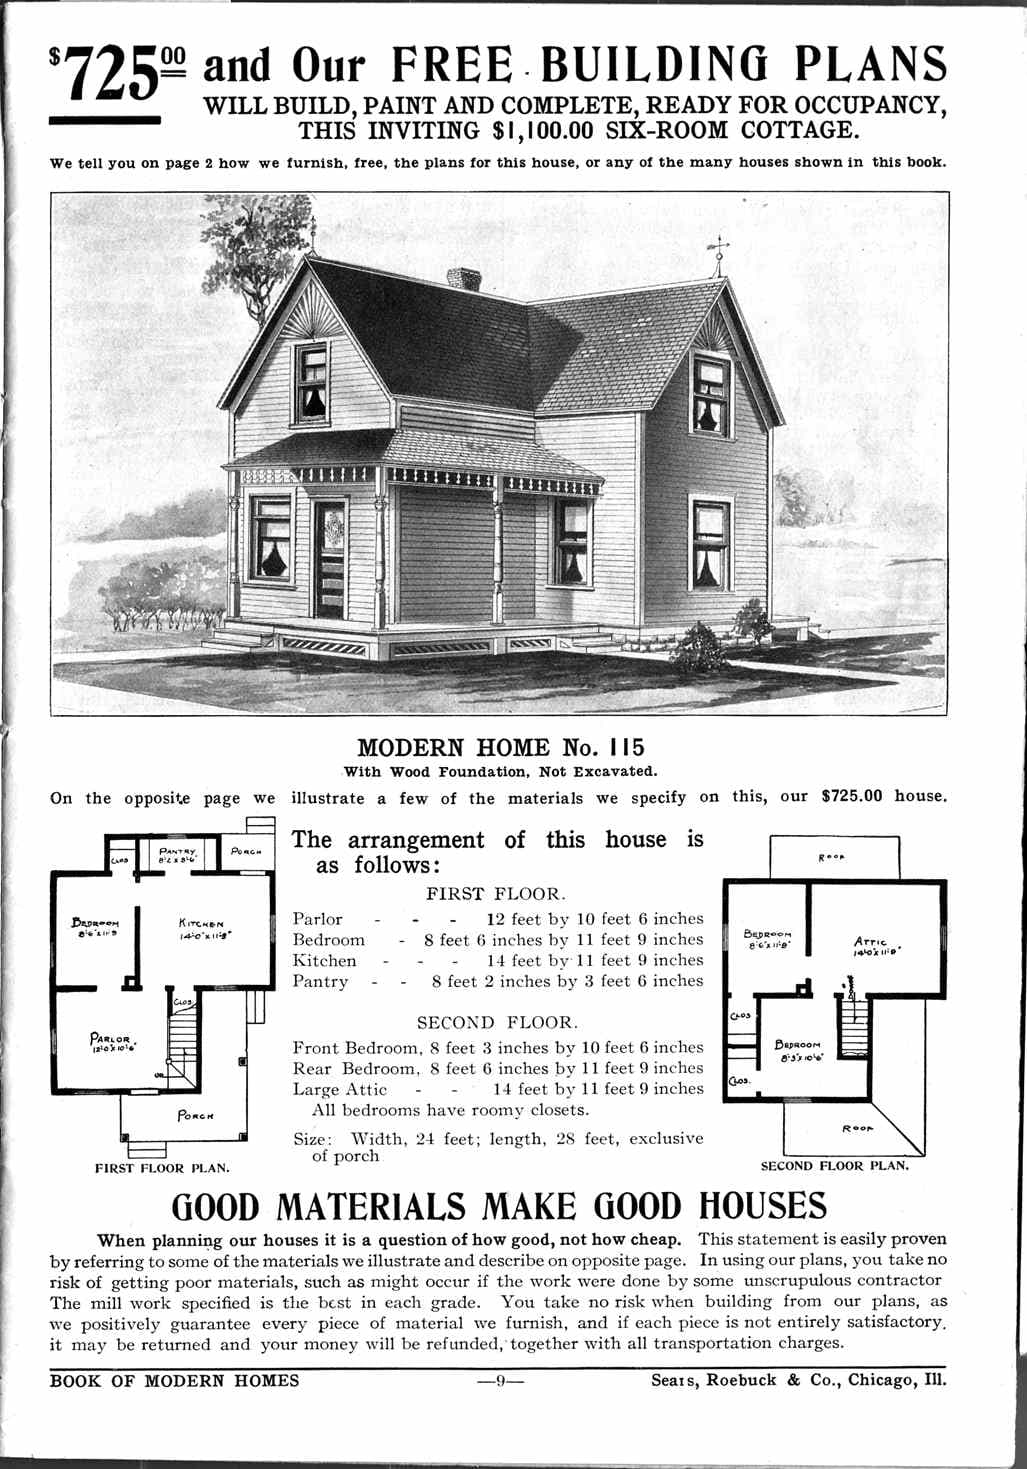 A Brief History of the Sears Catalog Home